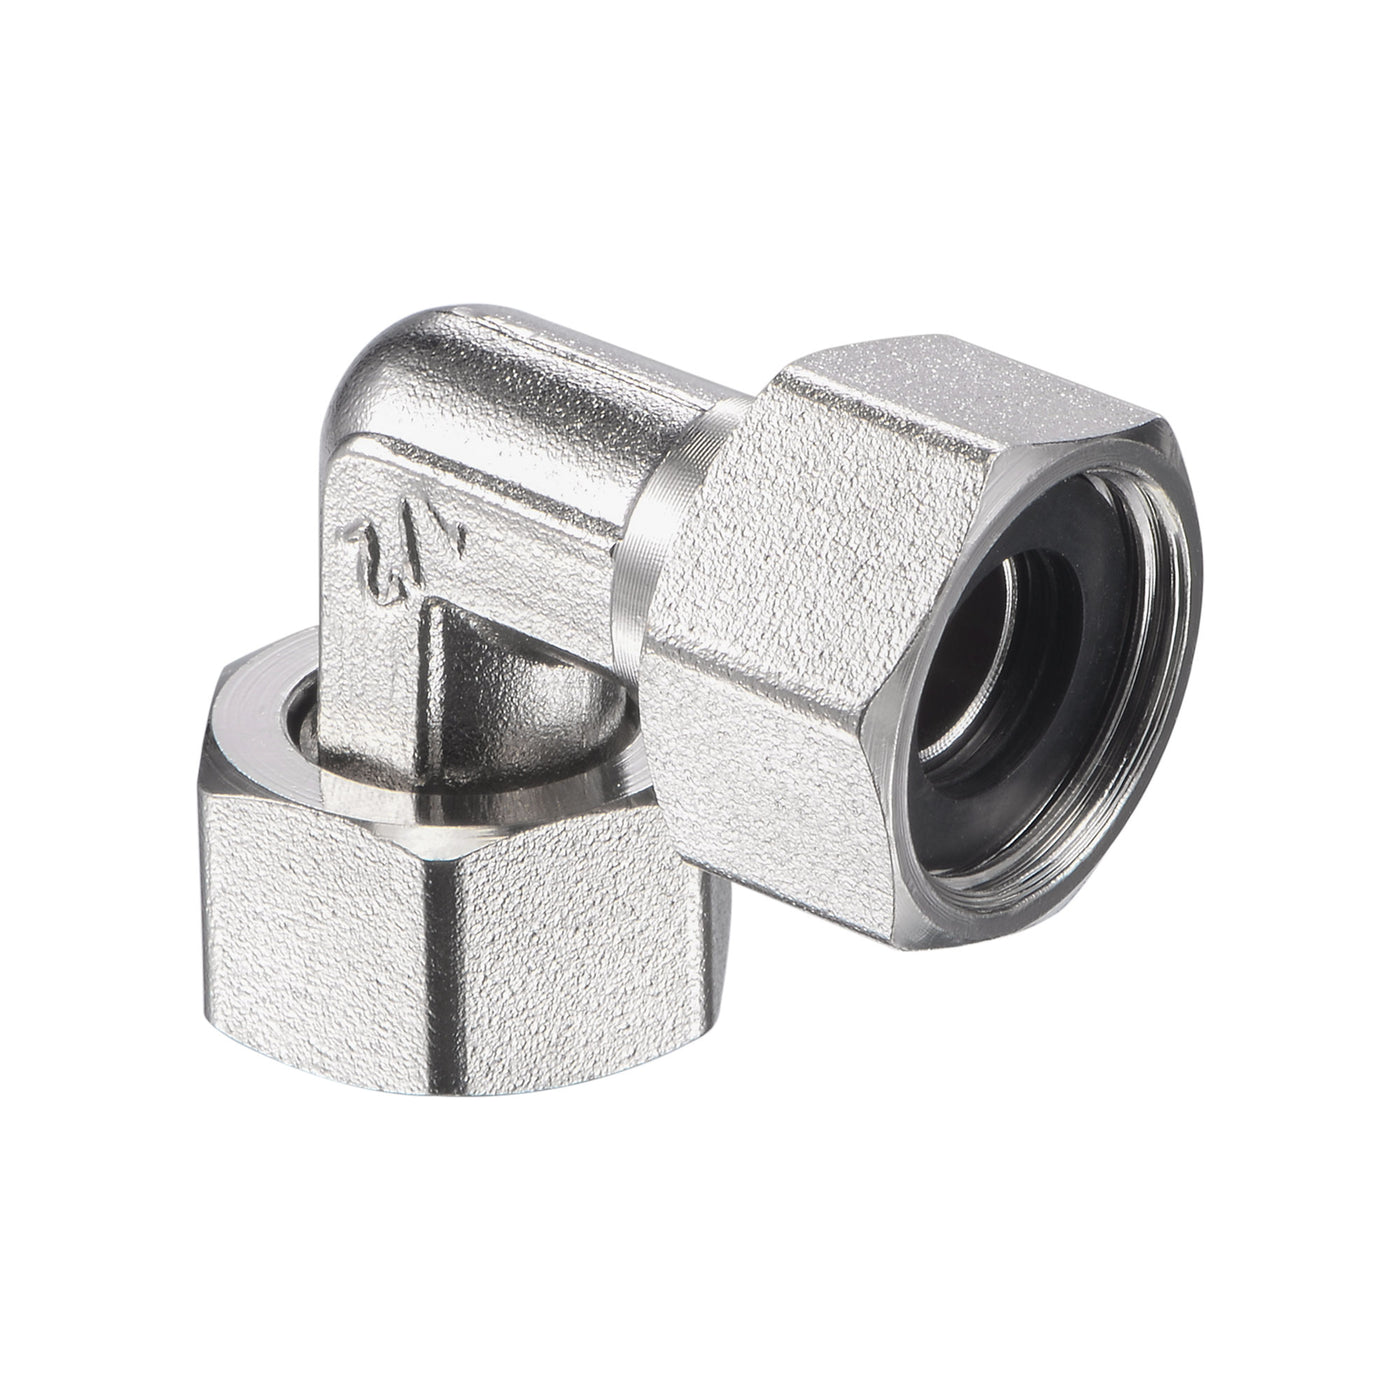 uxcell Uxcell Pipe Fitting Elbow G1/2 Female Thread 2 Way L Shape Hose Connector Adapter, Nickel-Plated Copper